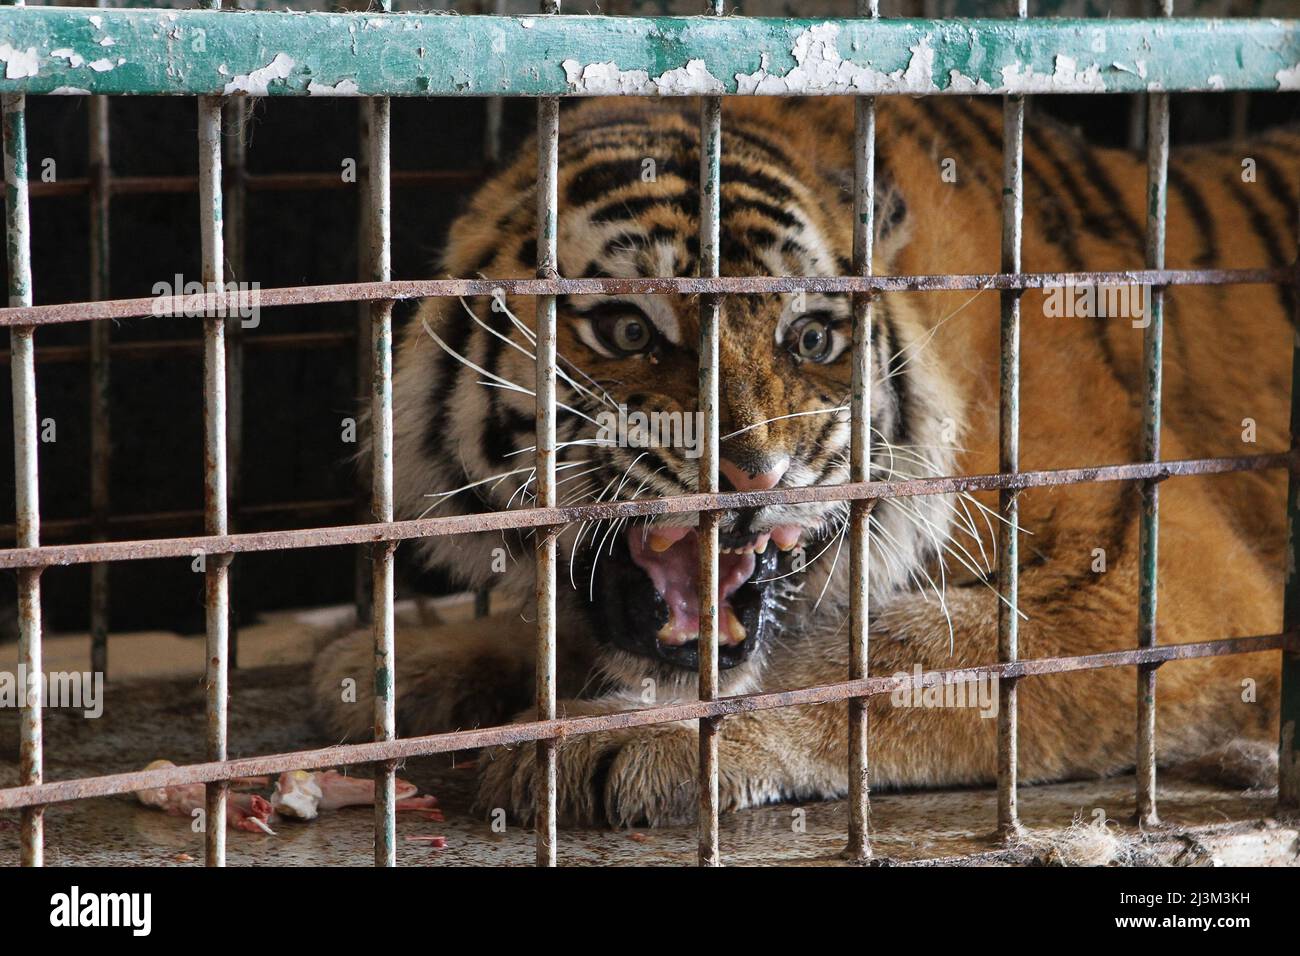 Dnipro, Ukraine. 08th Apr, 2022. A tiger stays in a cage after its evacuation from the ruined Kharkiv Feldman Ecopark, Dnipro, central Ukraine, April 8, 2022. Feldman Ecopark “is no more,” founder Alexander Feldman said in a statement on Tuesday after the zoo was “subjected to massive shelling and bombardment” from Russian forces. The statement said the zoo’s “biggest problem” was large predators, such as lions, tigers and bears, which would pose a major danger to humans if they got out of the zoo and roamed free. Feldman said their enclosures were intact but couldn’t withstand more damage. Fo Stock Photo